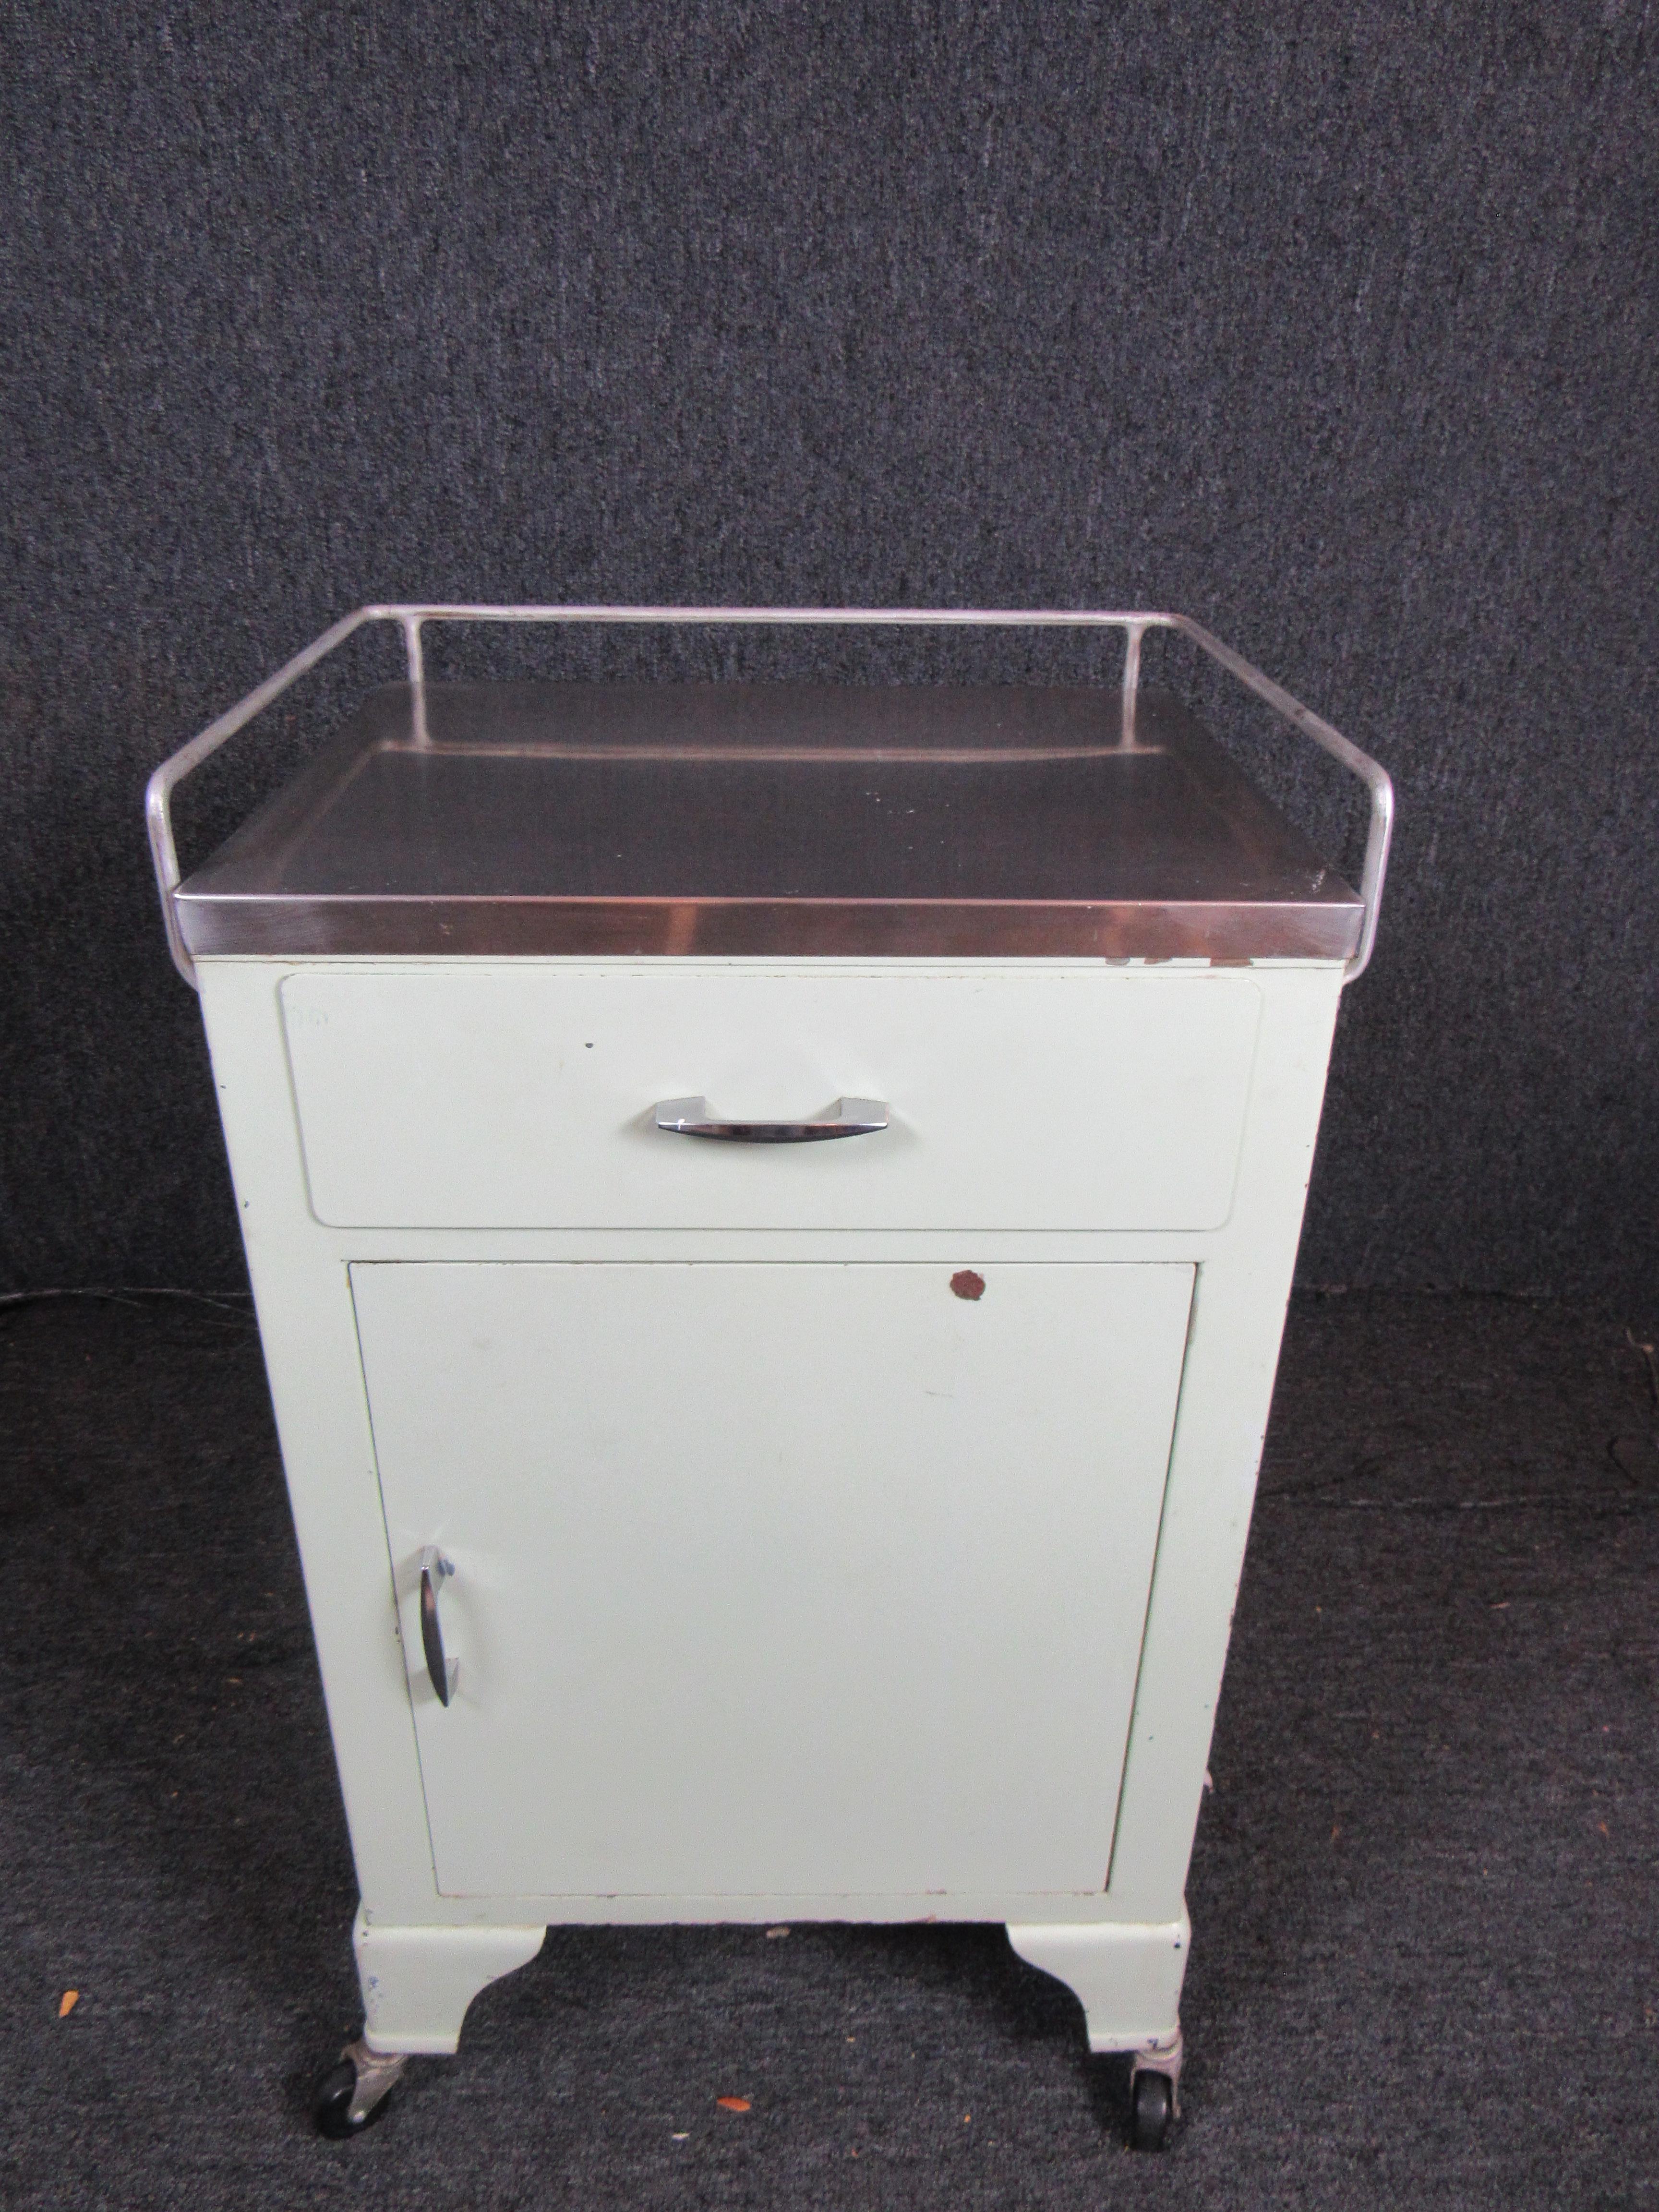 Wonderful vintage, authentic rolling doctor's cabinet in the classic mid-century mint green color. A nice sized cabinet and single pull-out drawer offers ample storage and organization options. Four, smooth casters makes rearranging a cinch. Please